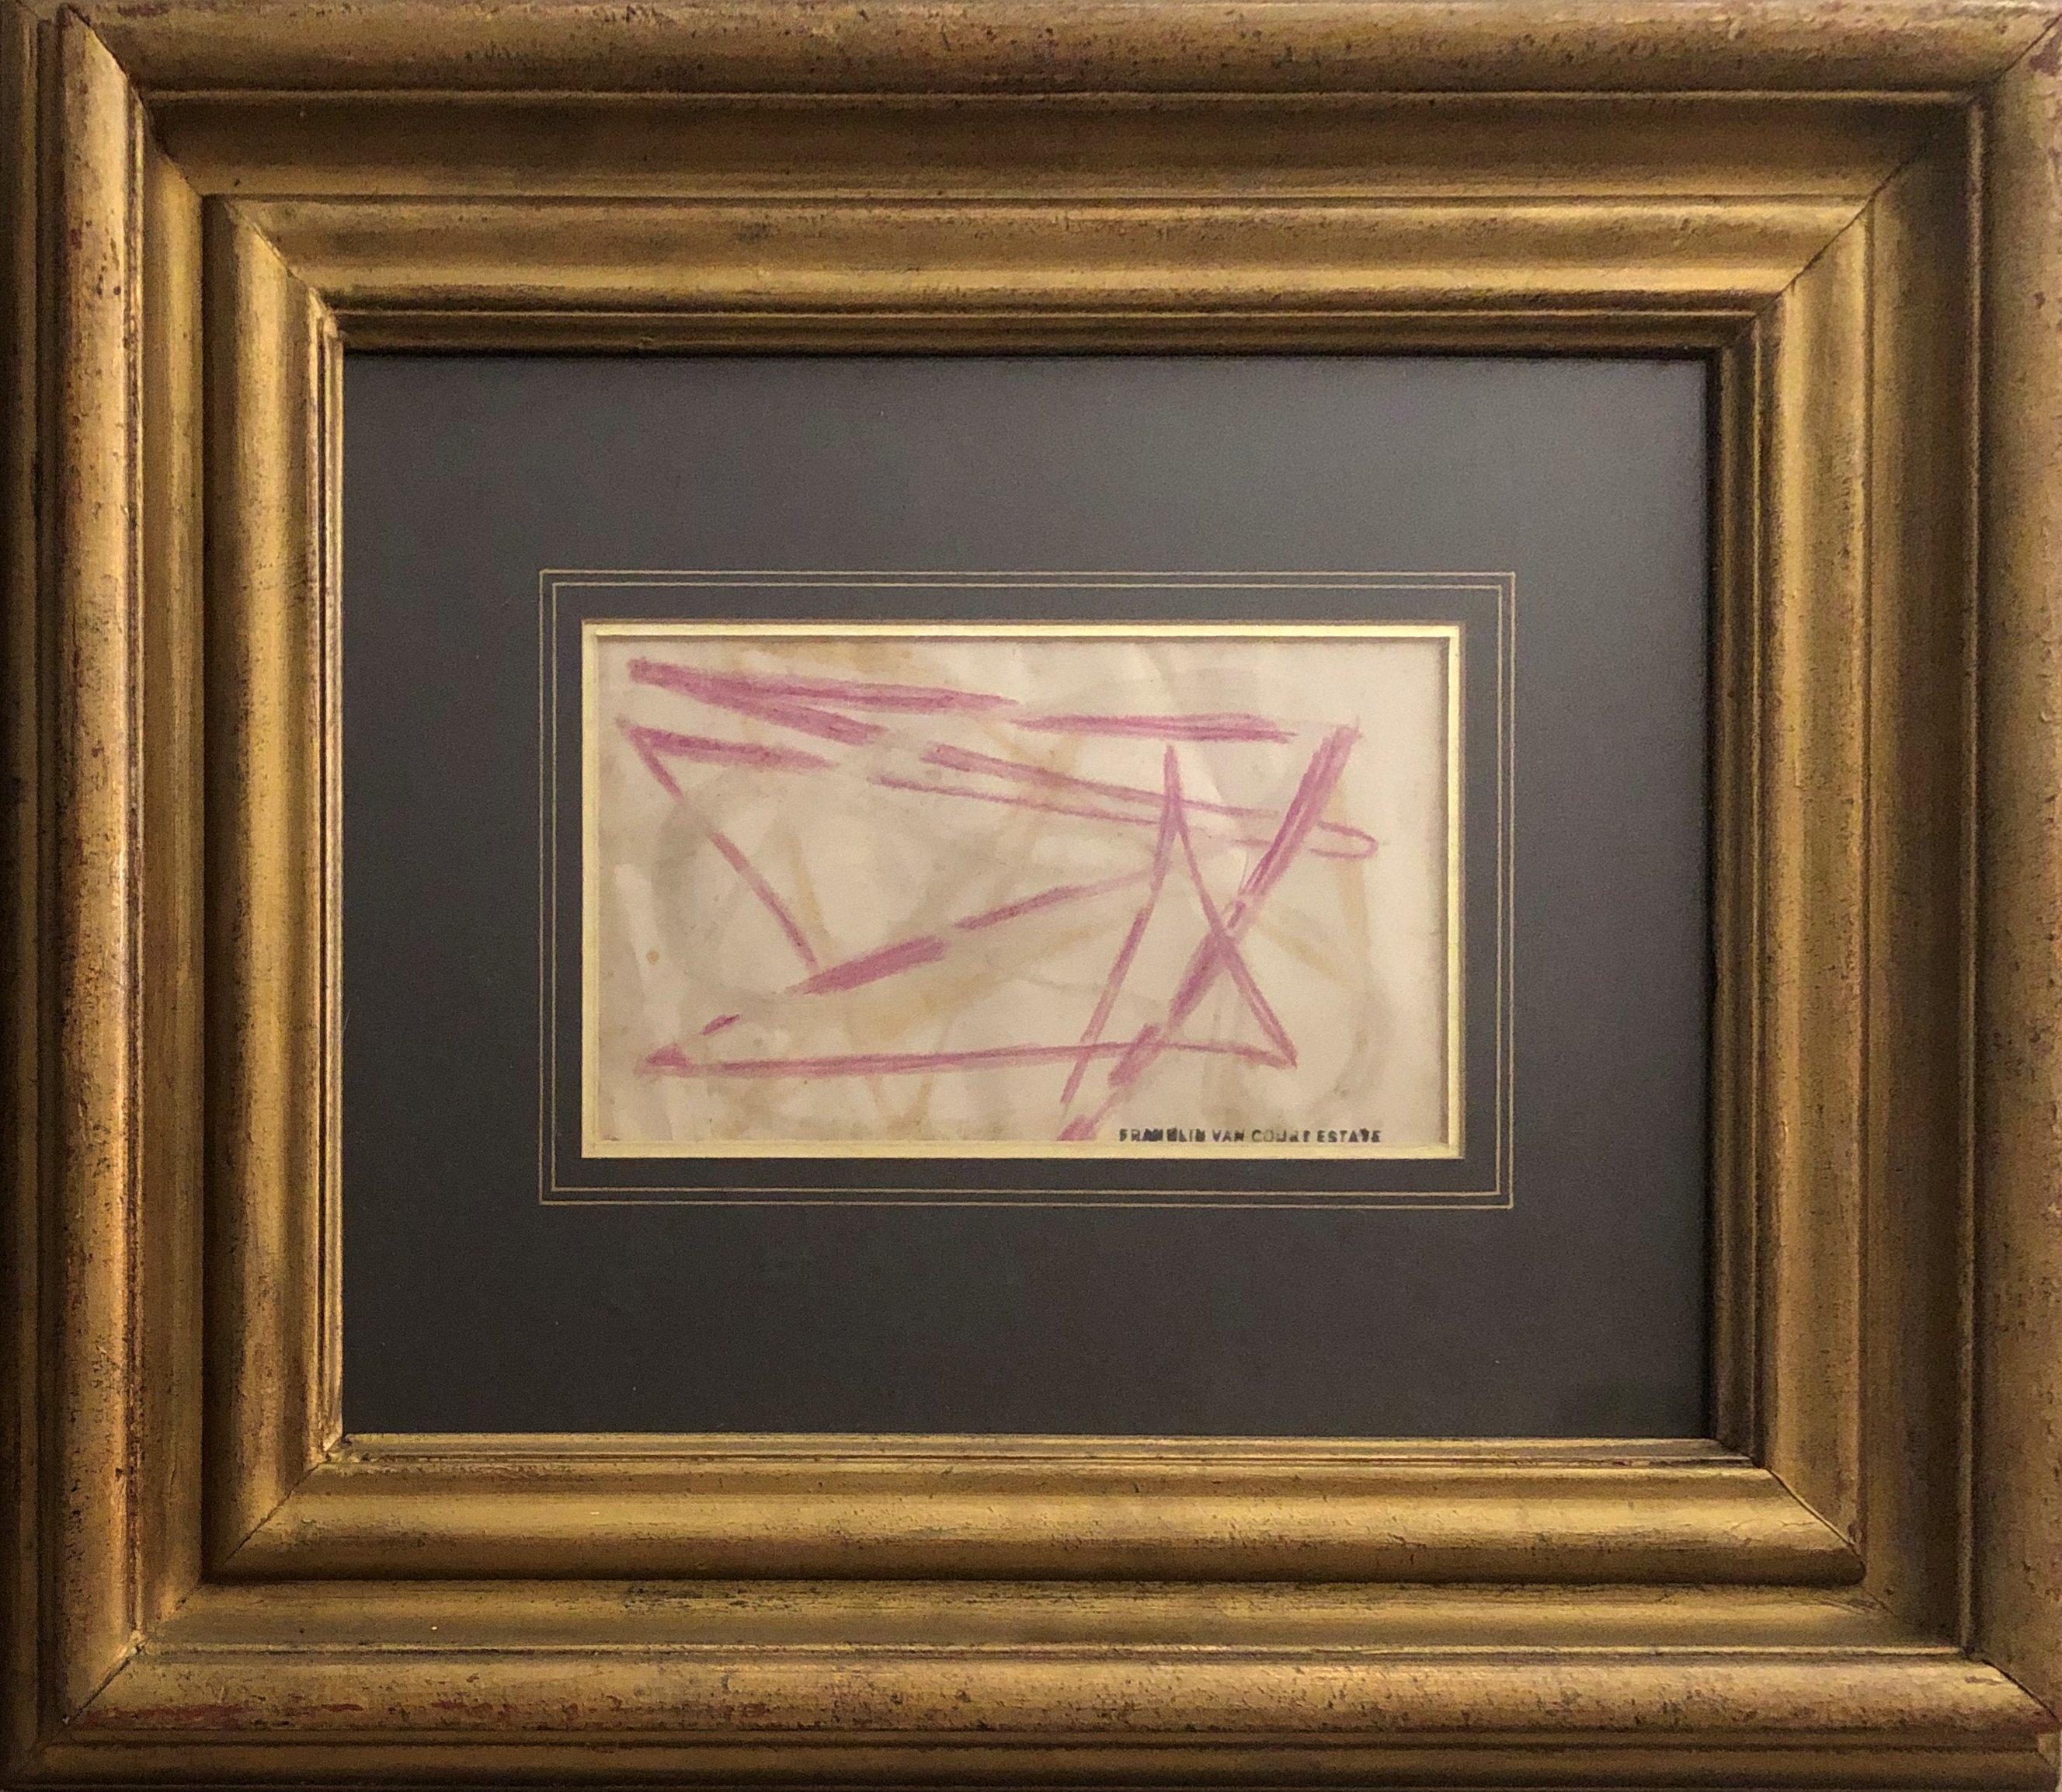 Franklin Van Court (American, b. 1903)
Untitled Abstract, n.d.
Watercolor on paper
5 x 8 7 3/4 inches
Stamped by the estate

Provenance:
Private Collection, New York


Franklin Van Court was born Franklin V. Brown, in Chicago in 1903. He studied at